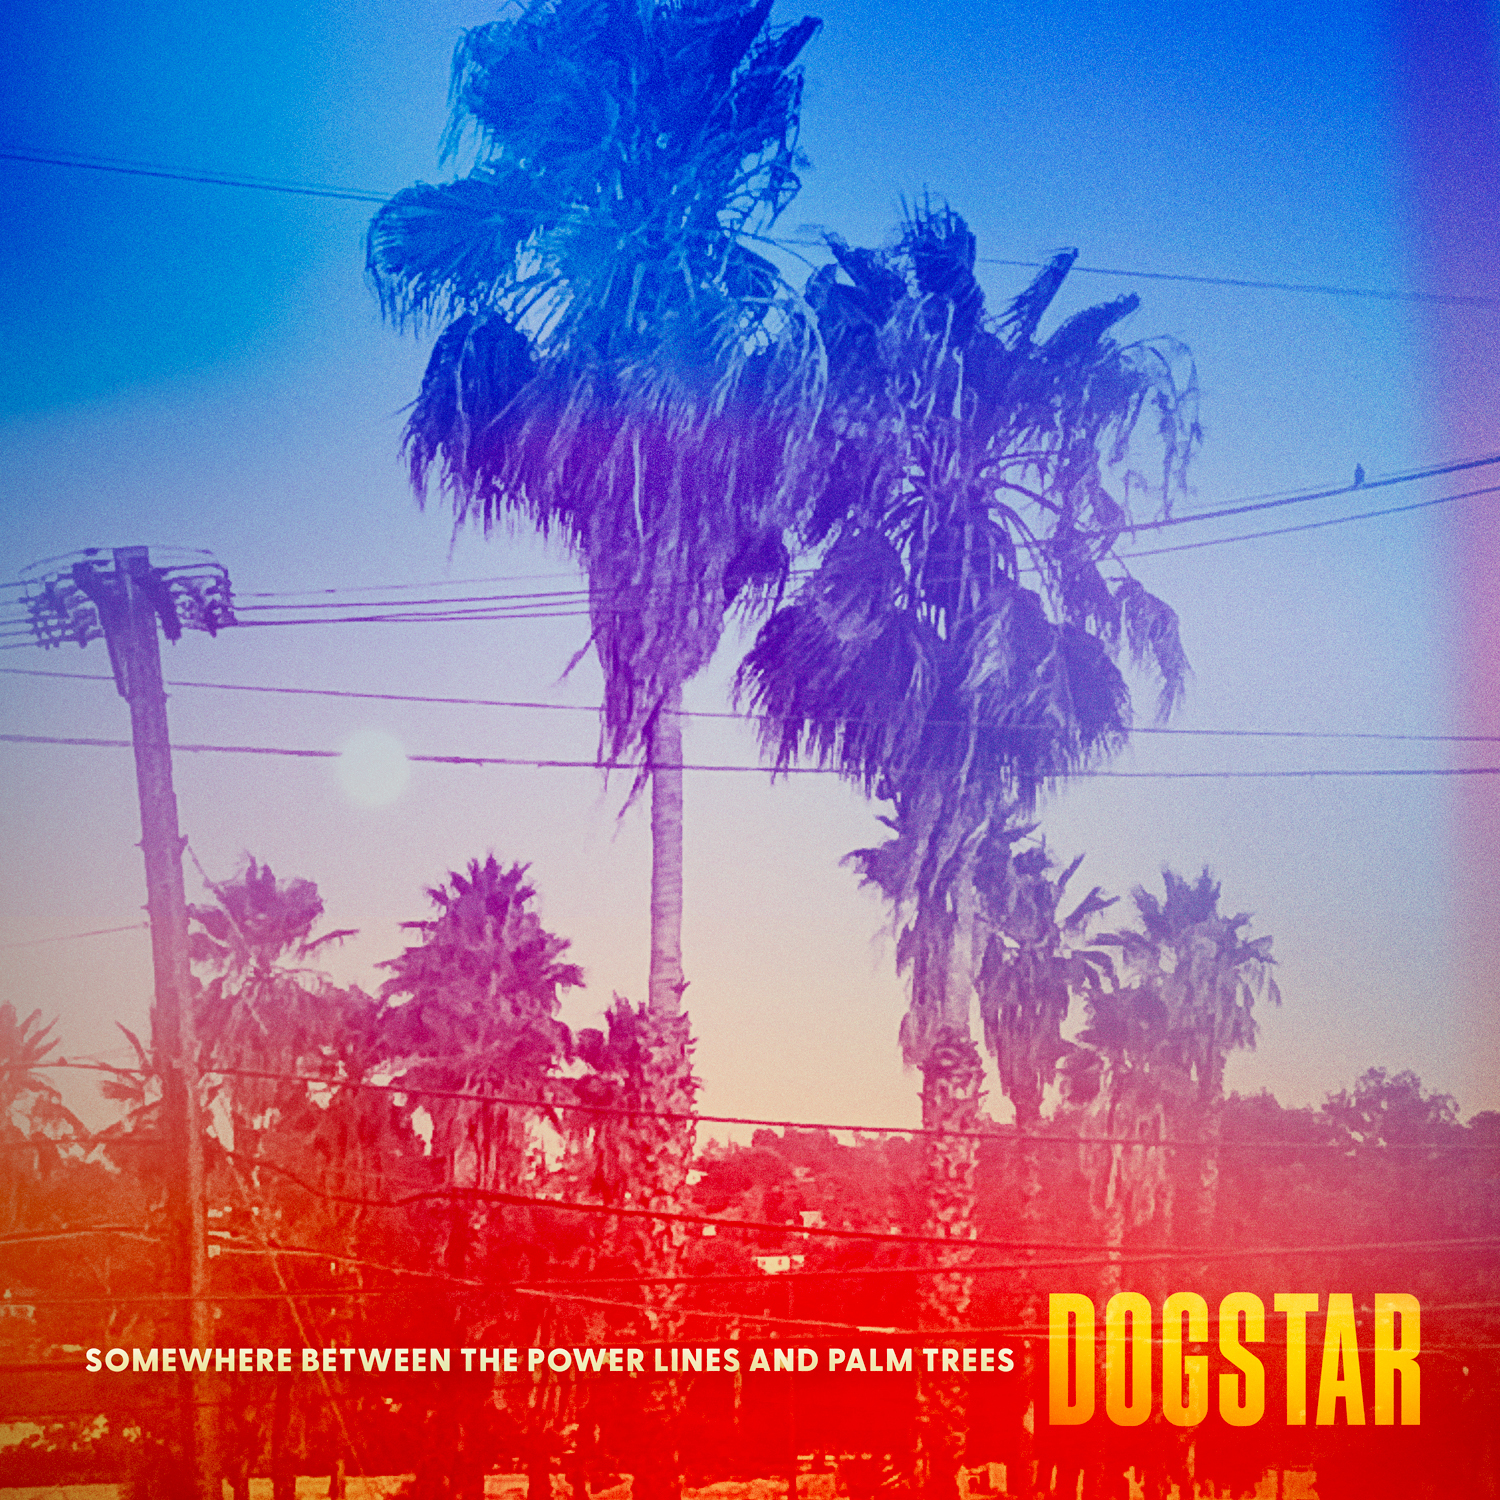 Dogstar Announces New Album - Somewhere Between the Power Lines and Palm Trees